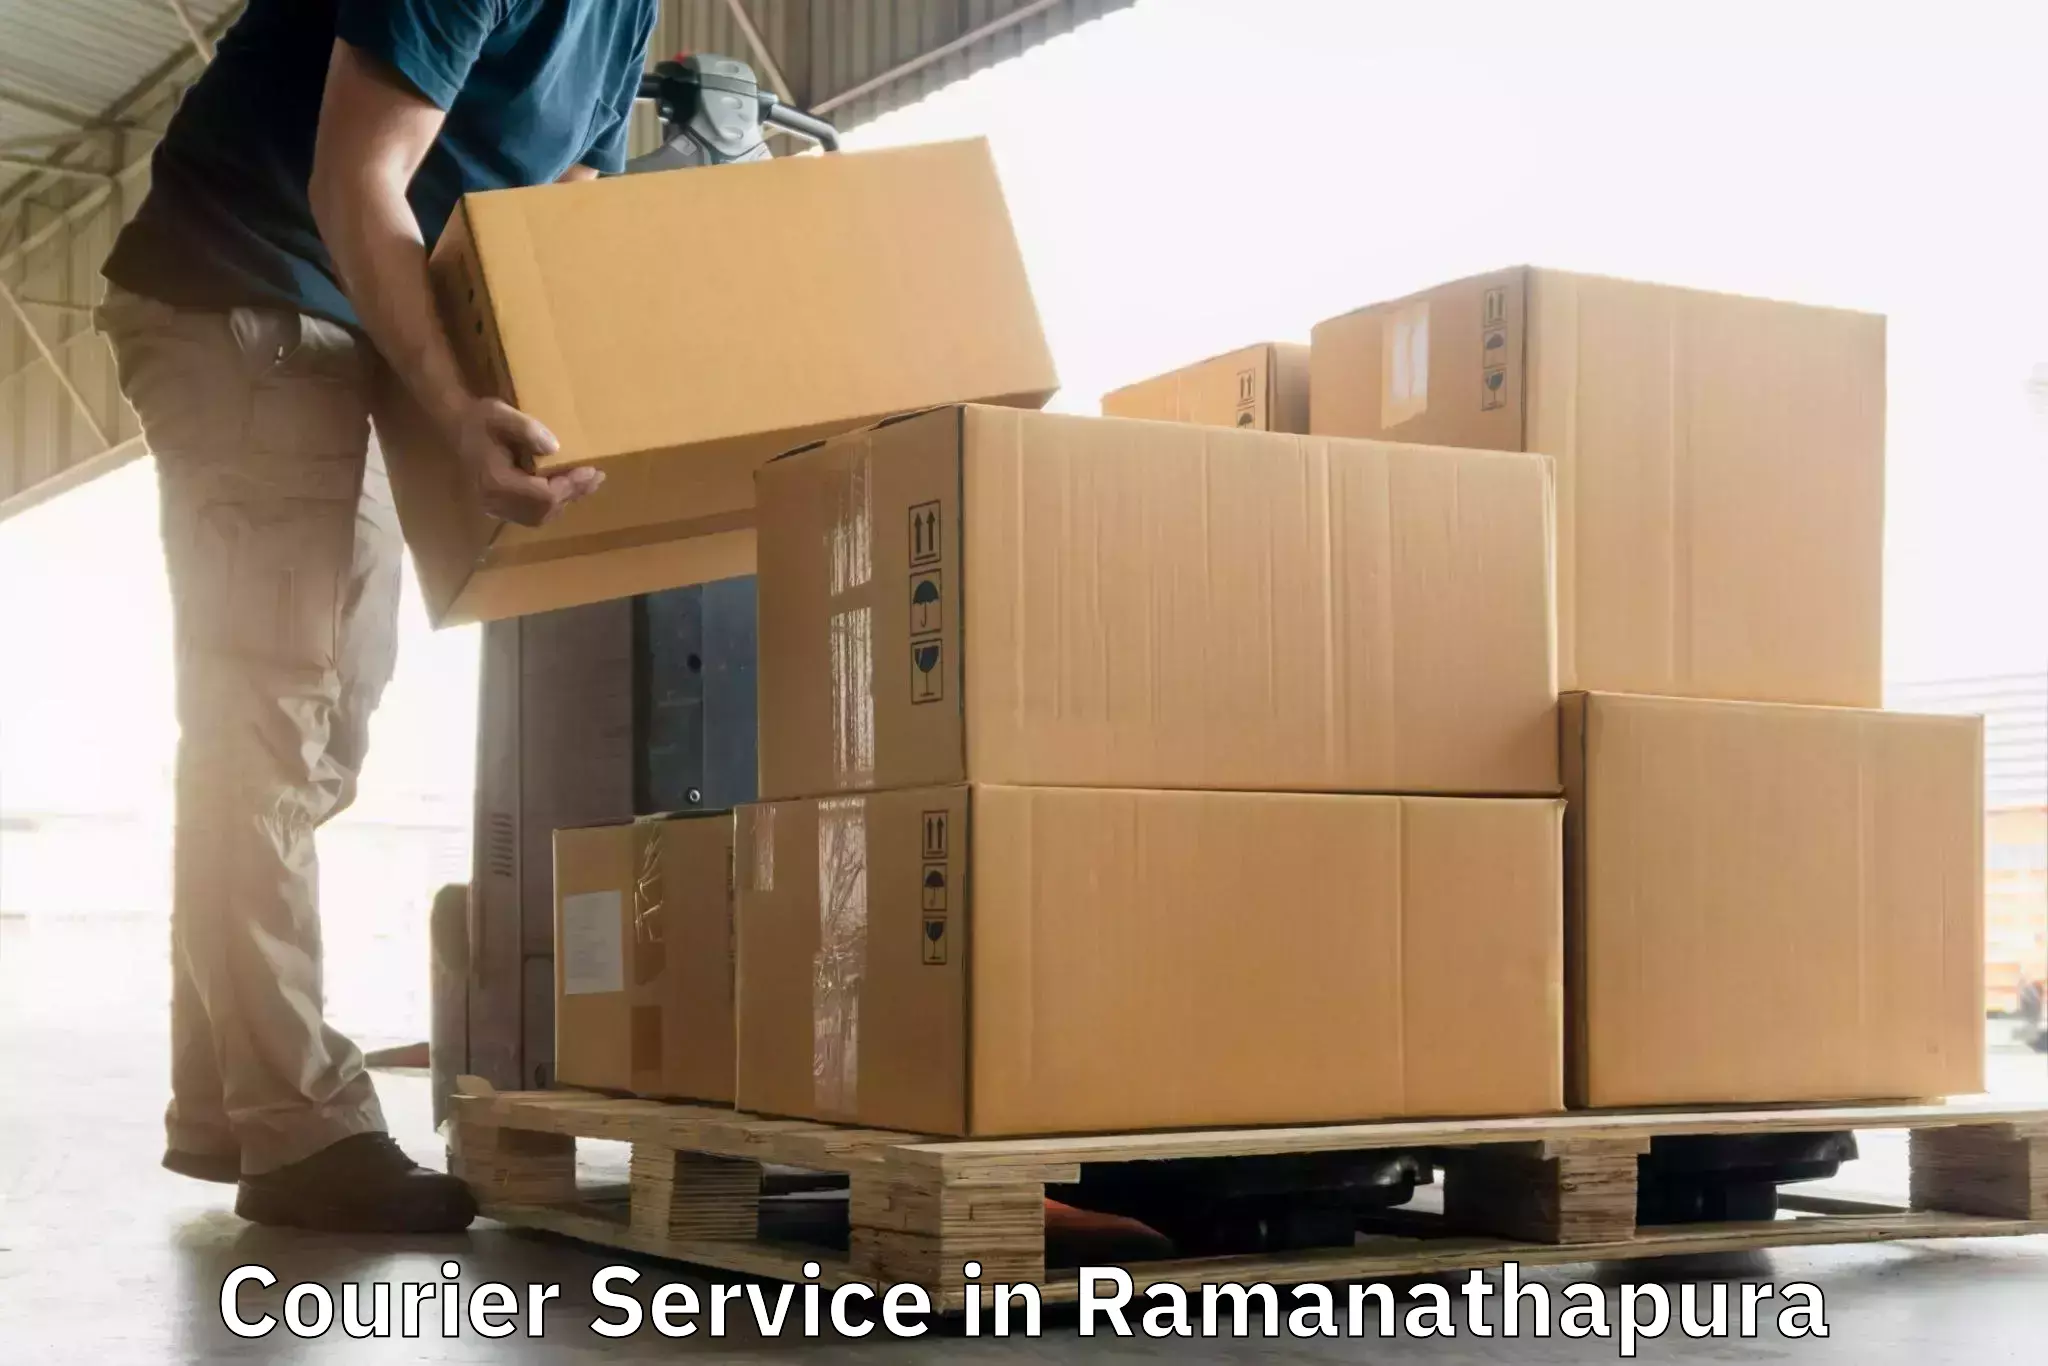 Expedited parcel delivery in Ramanathapura